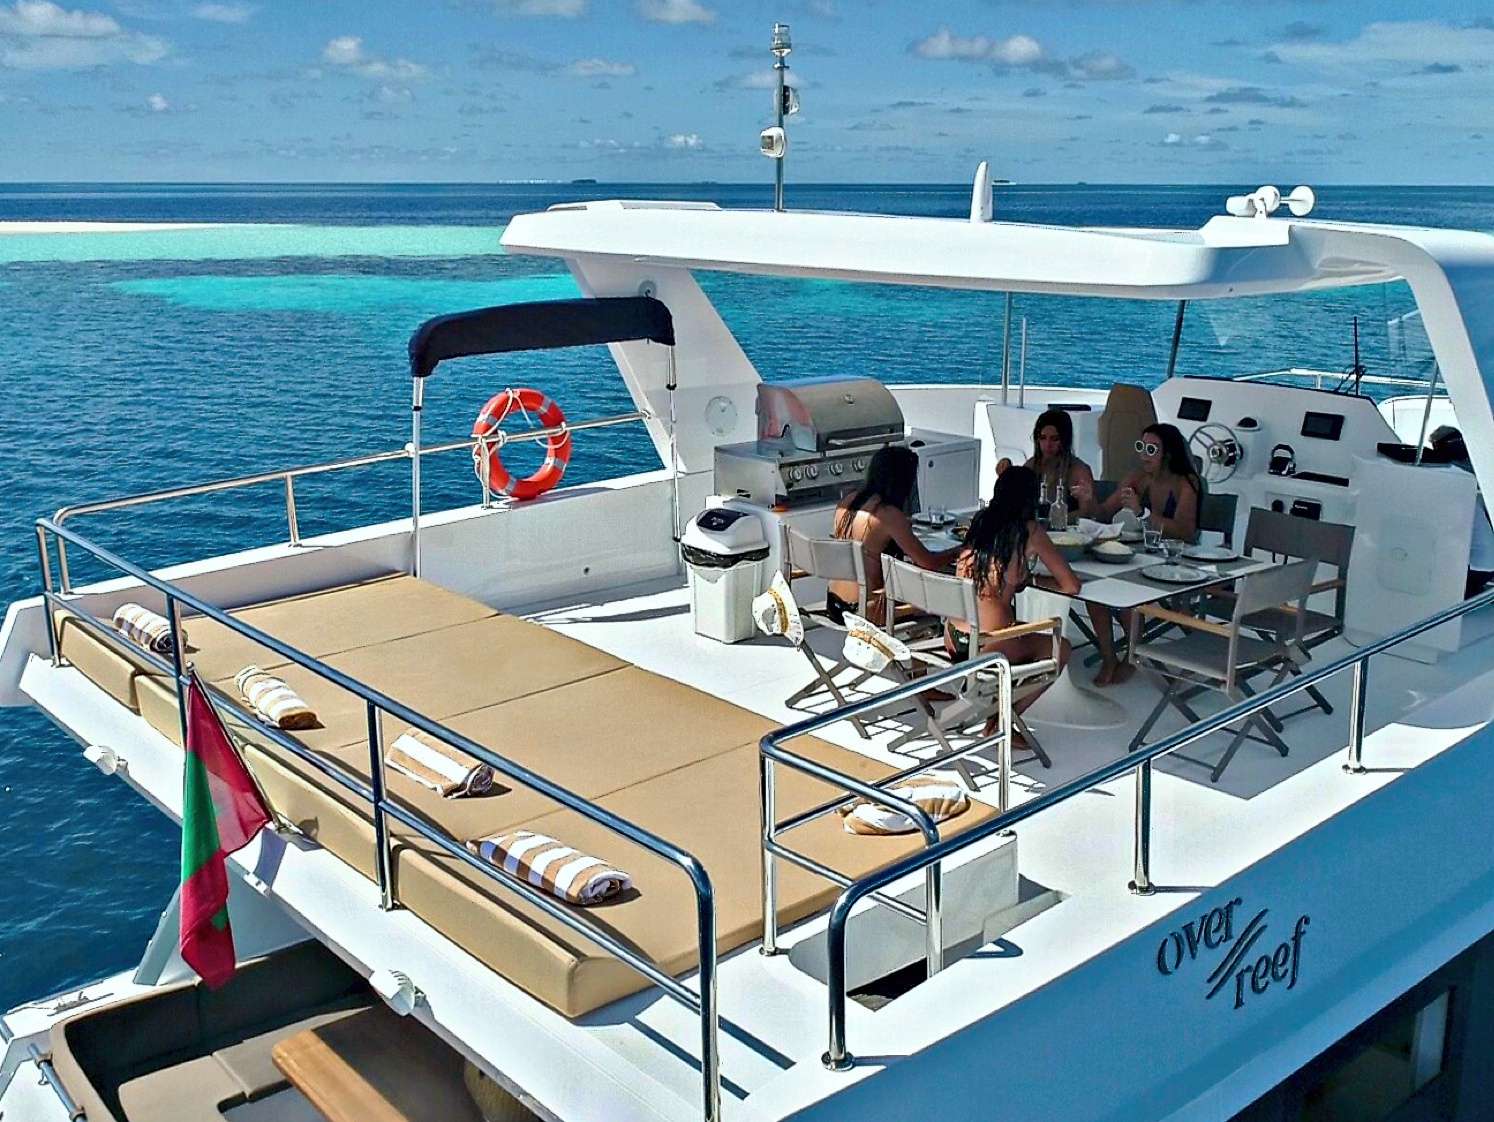 OVER REEF - Motor Boat Charter Seychelles & Boat hire in Indian Ocean & SE Asia 5